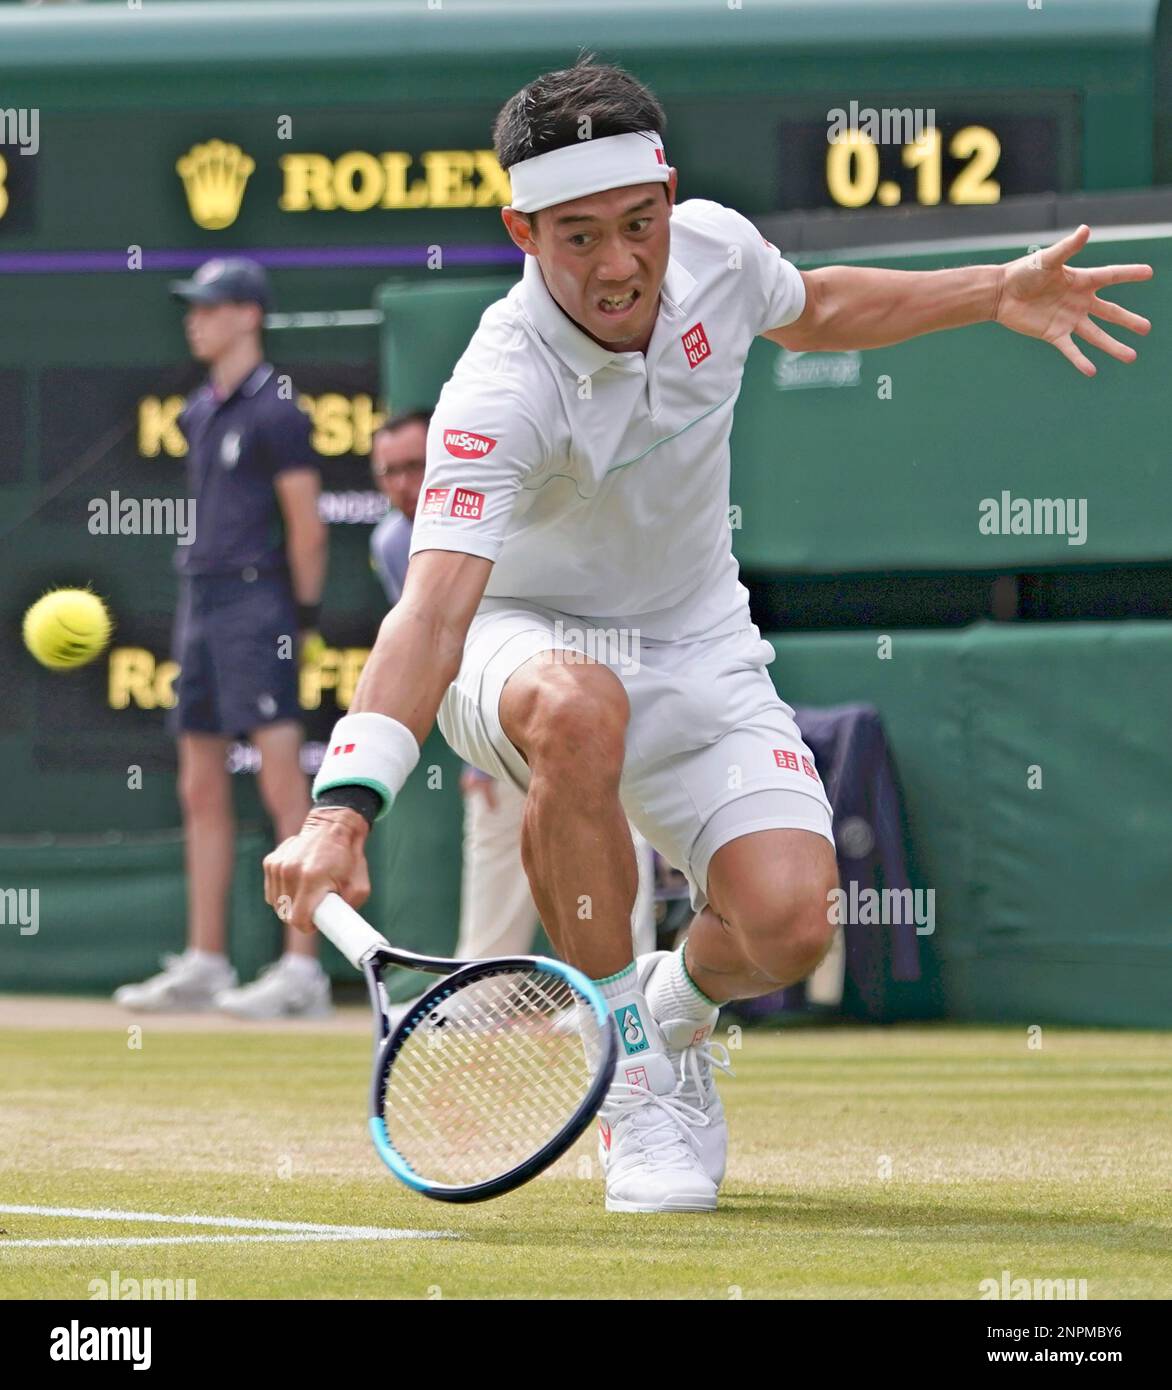 A file photo shows Kei Nishikori of Japan hiting a ball during the Men's  singles quarterfinals of the Championships, Wimbledon against Roger Federer  of Switzerland at the All England Lawn Tennis and